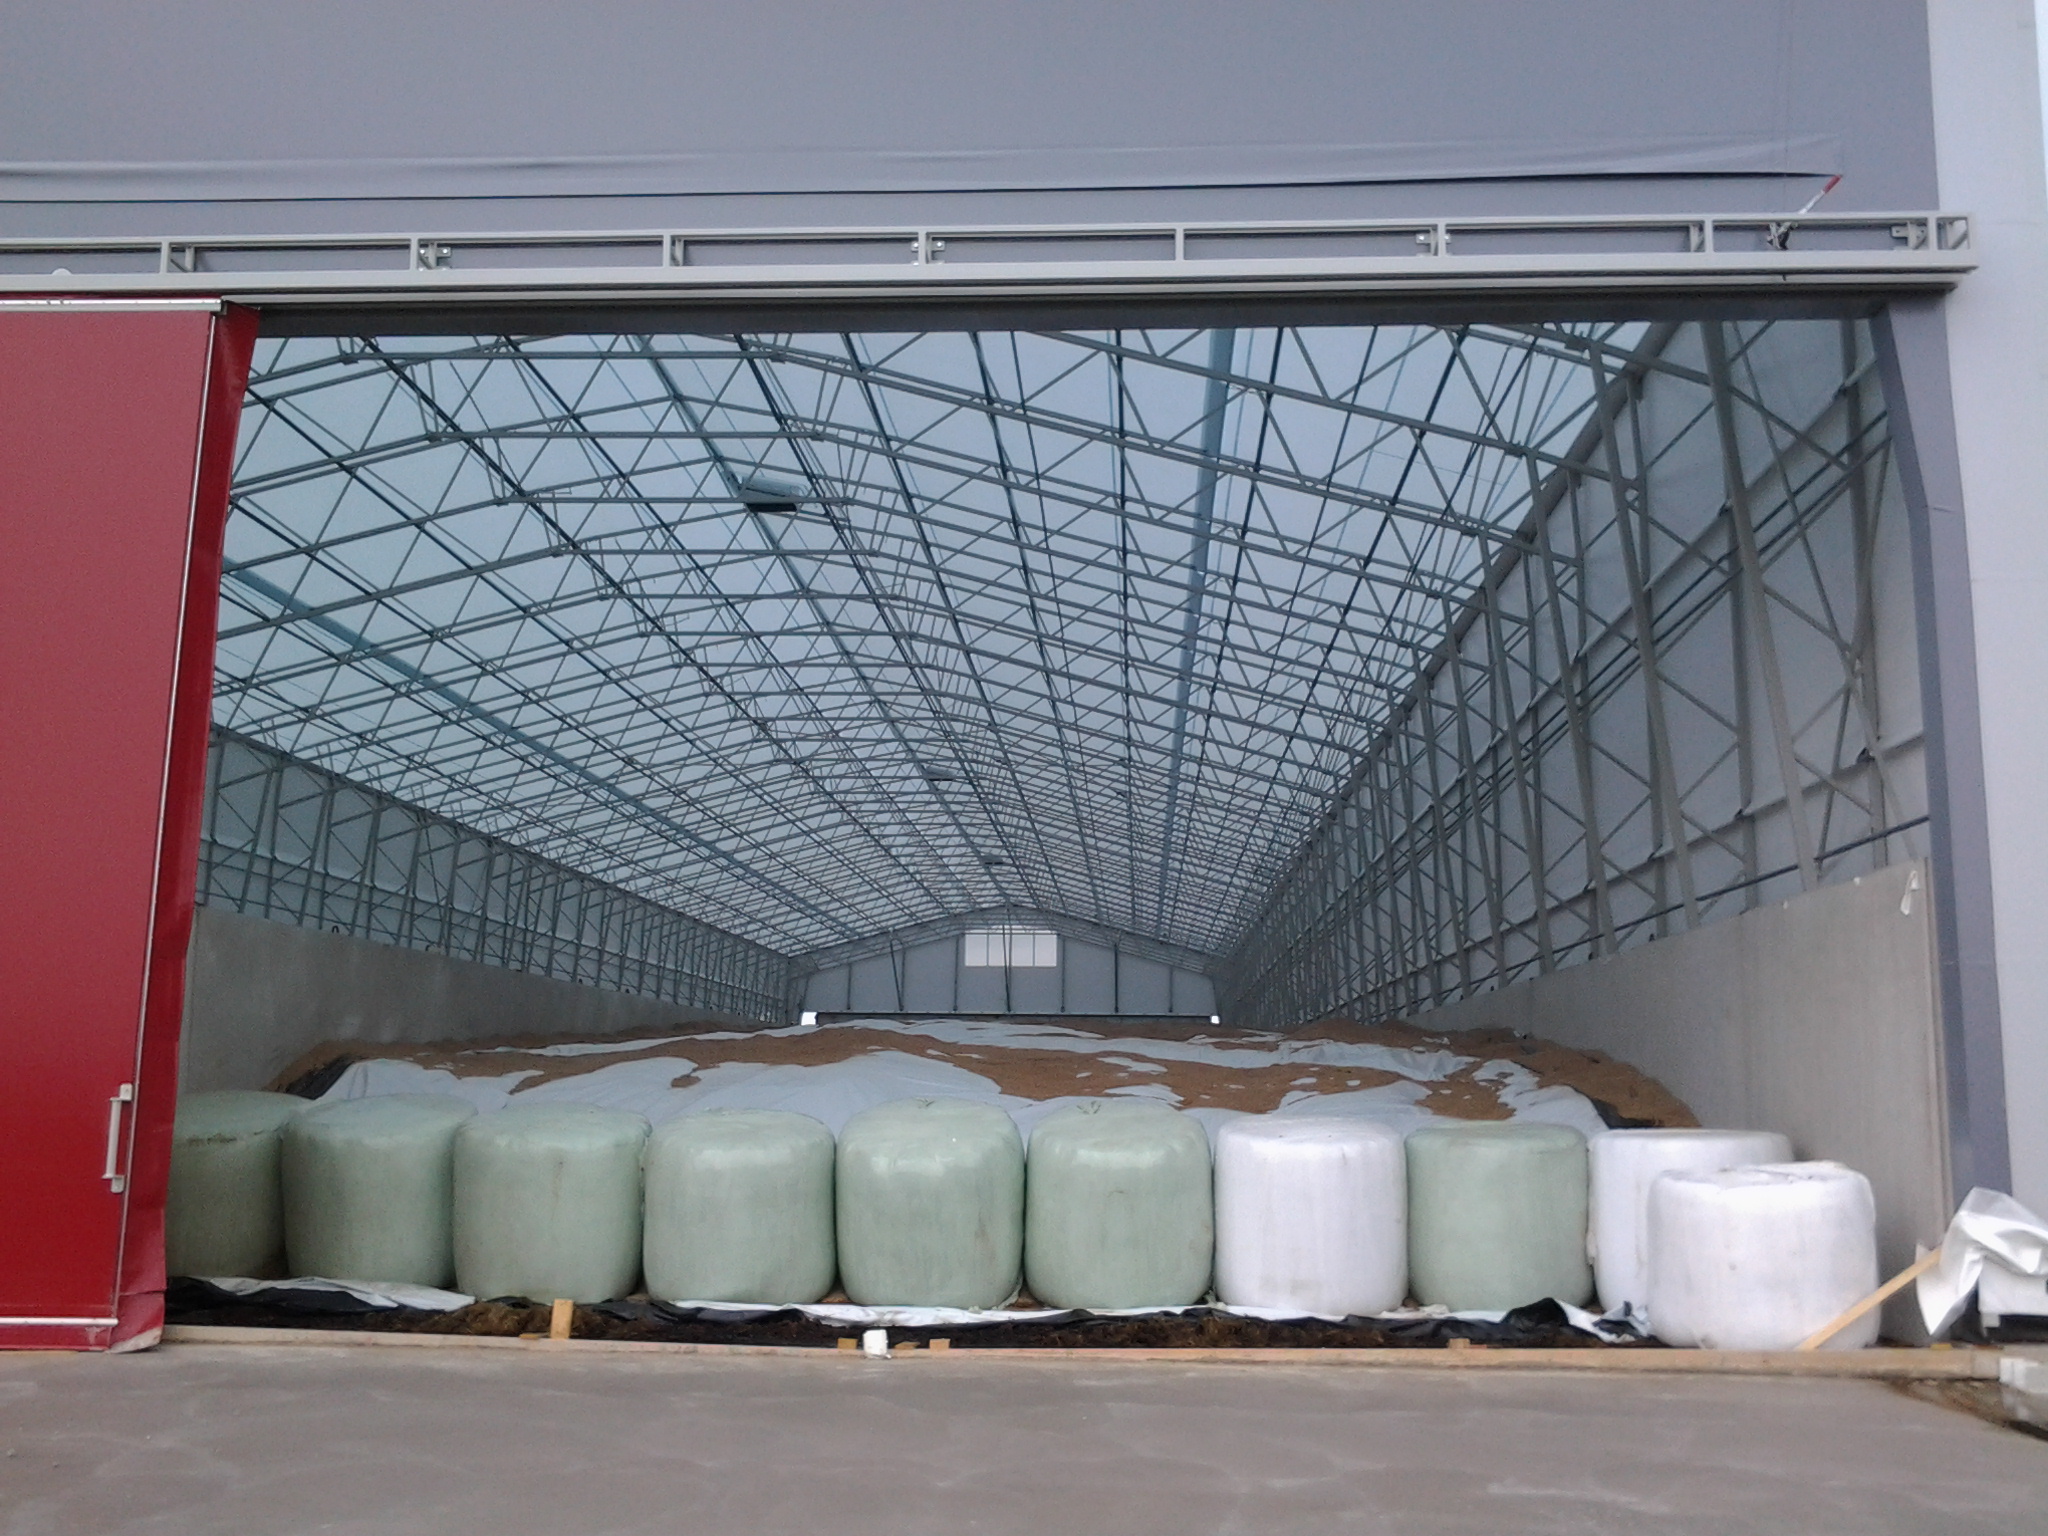 Storage and Warehouse Fabric Structures